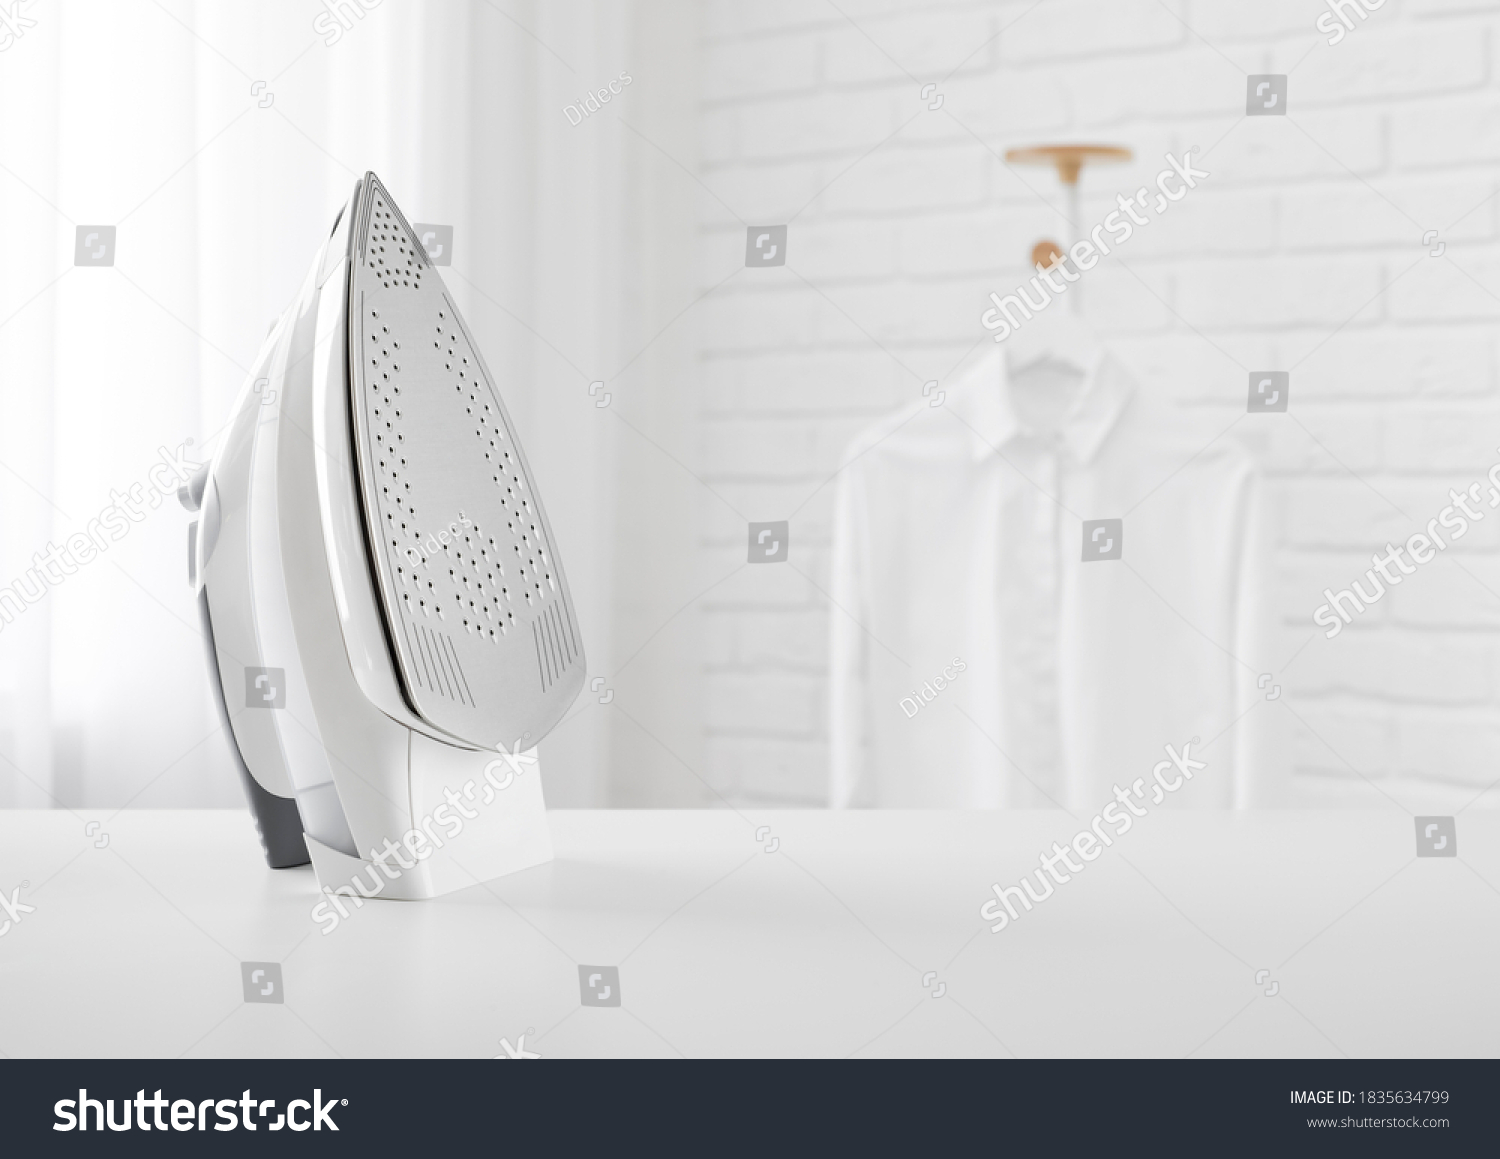 Electric iron on table in blurred room with clothes rack #1835634799